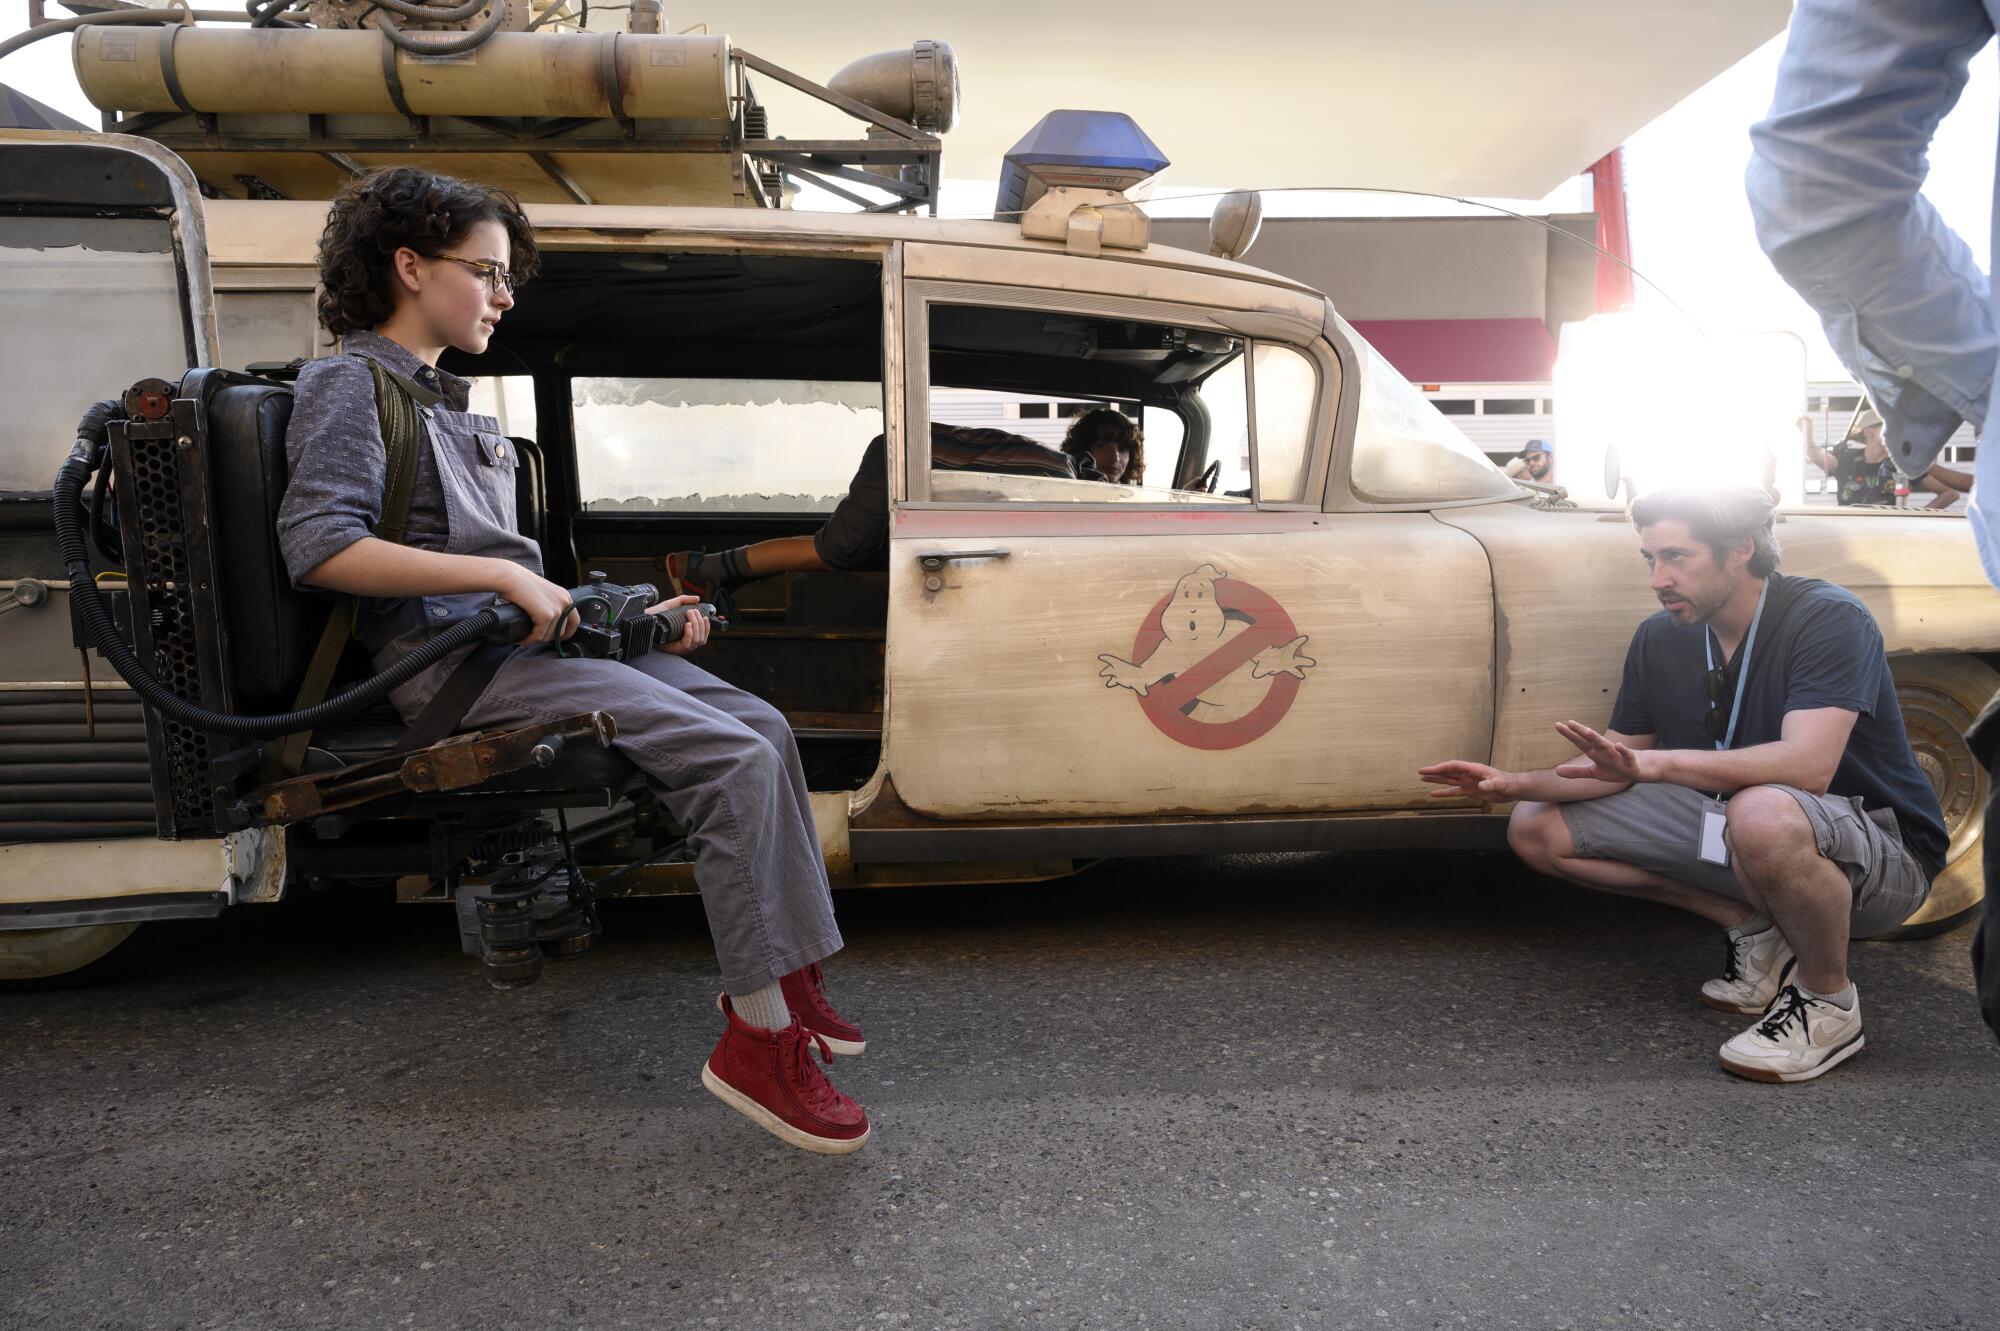 Director Jason Reitman with Mckenna Grace in the new Ecto-1 jump seat on the set of "Ghostbusters: Afterlife."